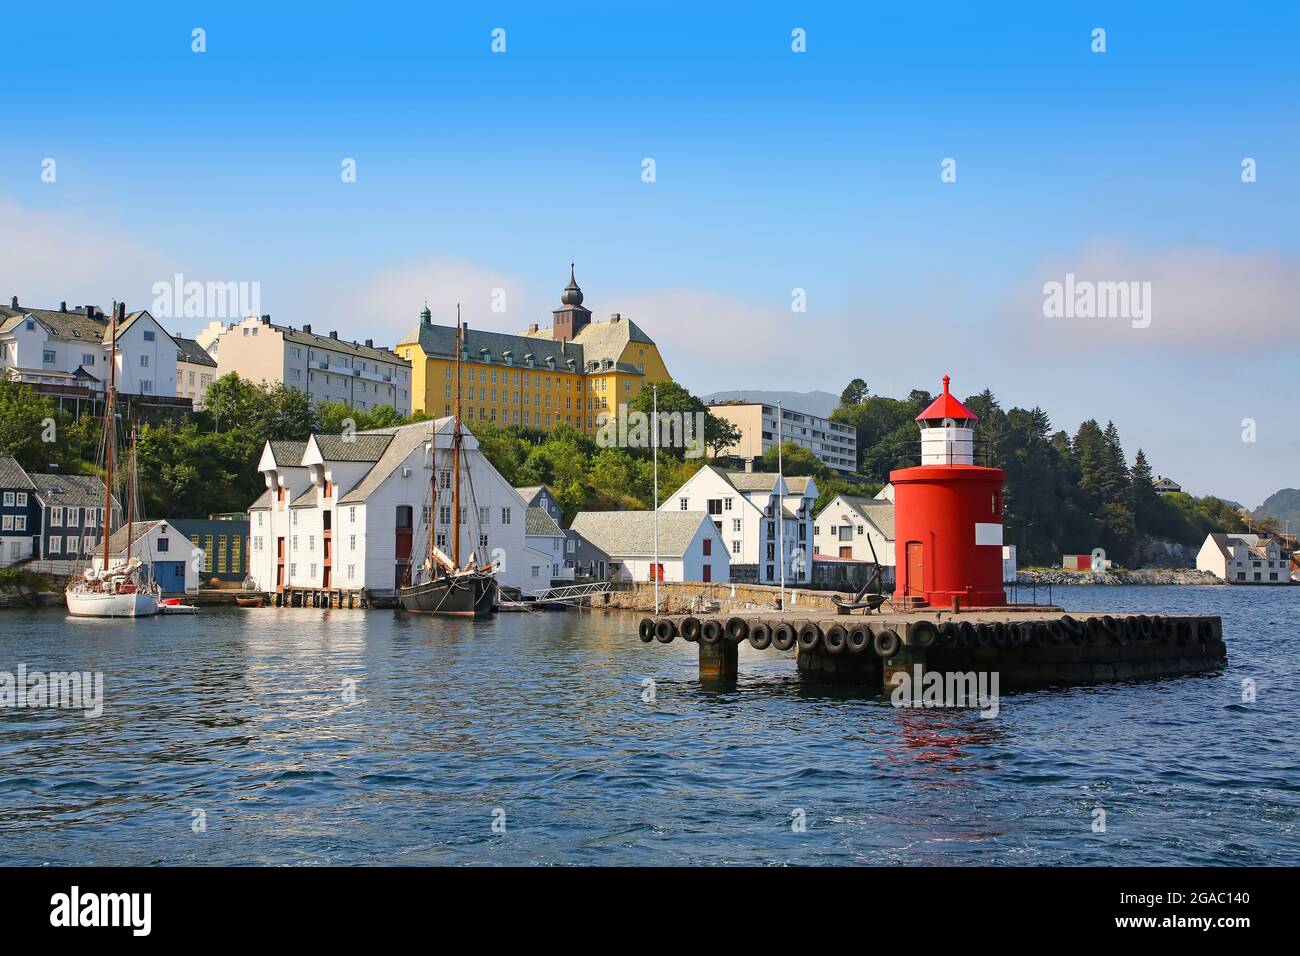 Historic buildings, pier and traditional fishing boats along the waterfront of the harbour. Lighthouse in the foreground of the getty, Alesund, Norway Stock Photo